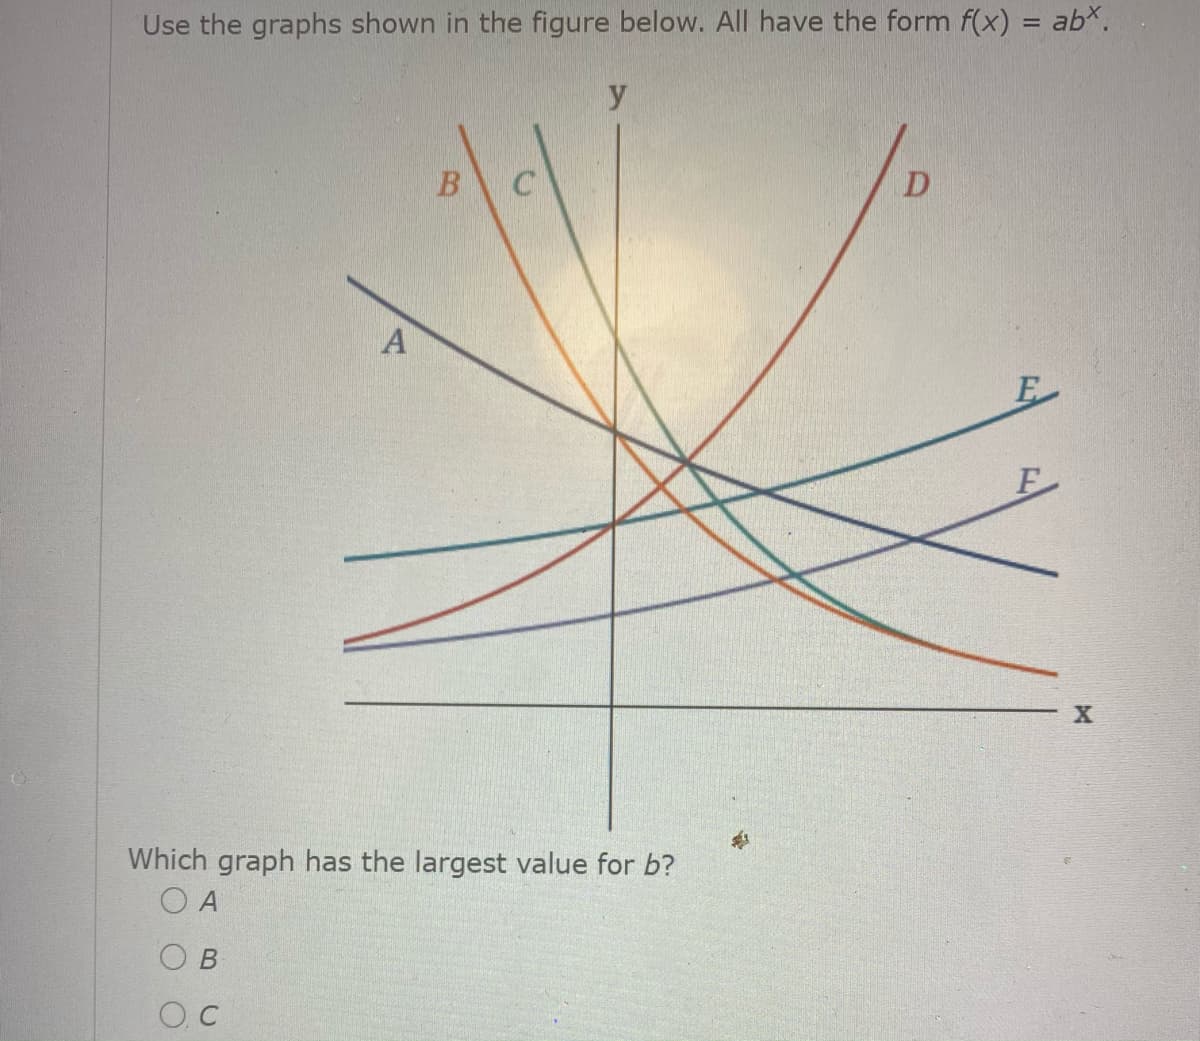 Use the graphs shown in the figure below. All have the form f(x) = ab*.
y
D
A
E
Which graph has the largest value for b?
O A
O B
O.C
